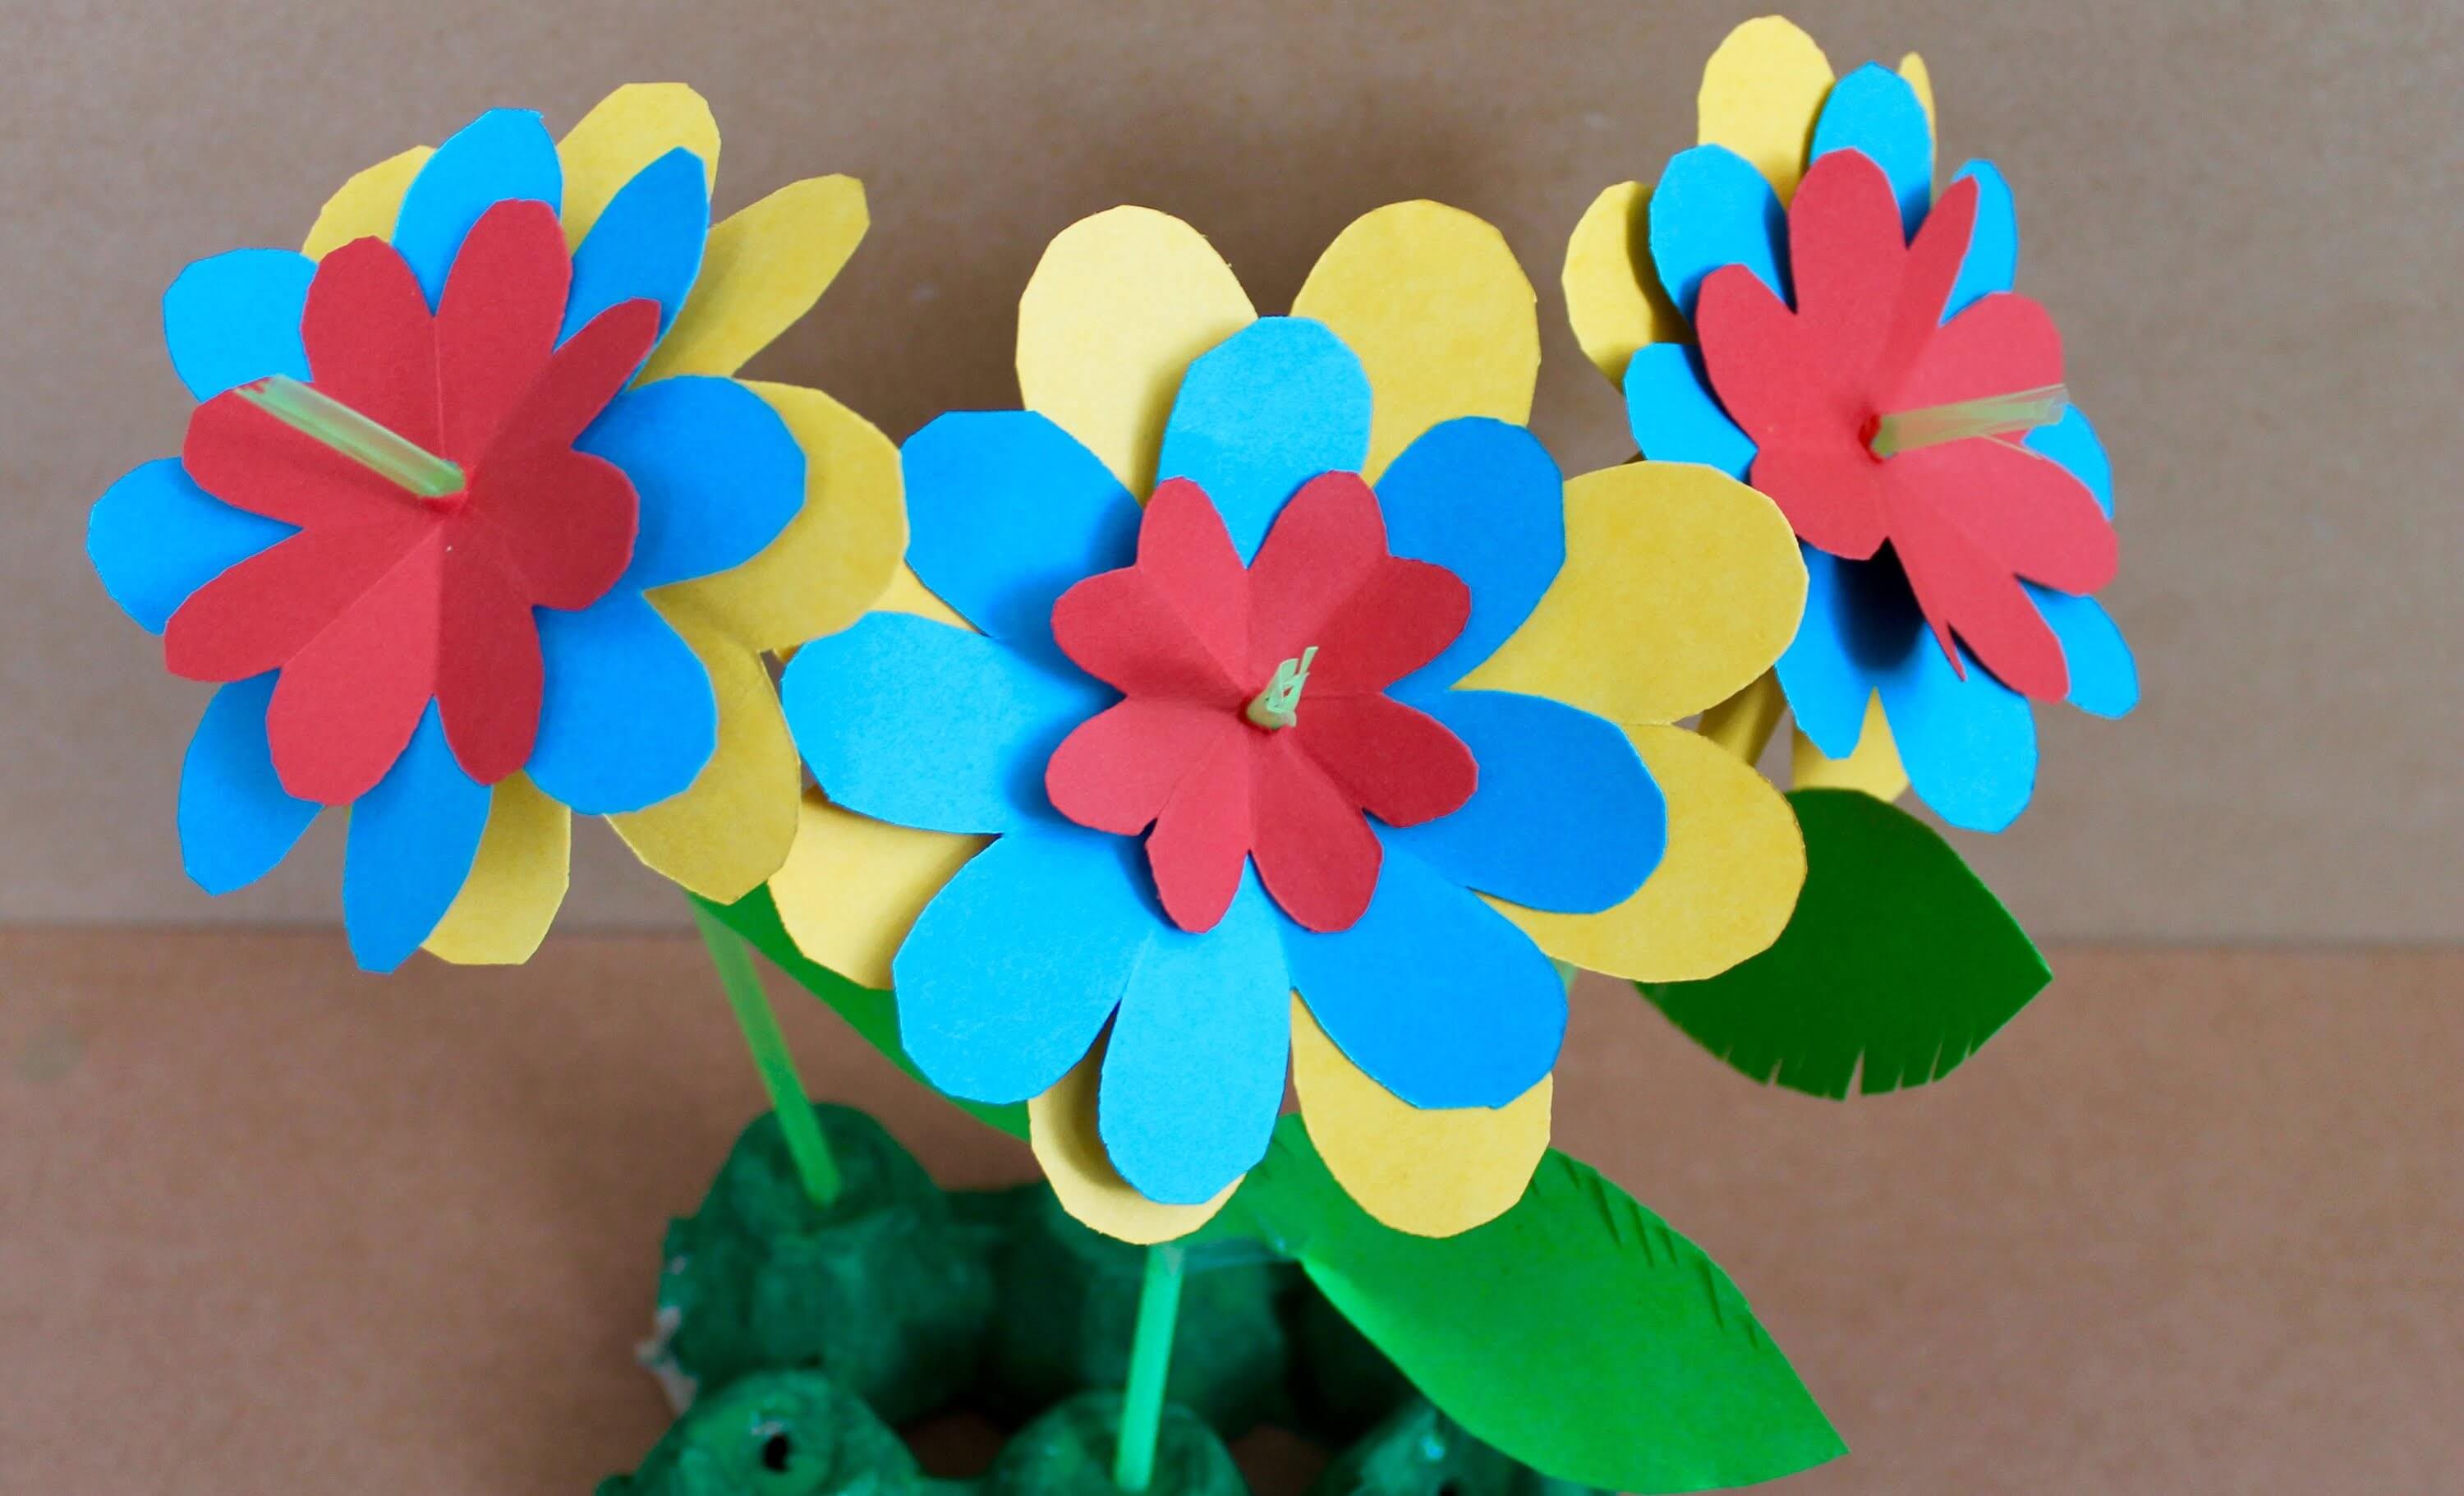 17 Simple & Most Funny DIY Paper Crafts For Kids – Try it today! | Live